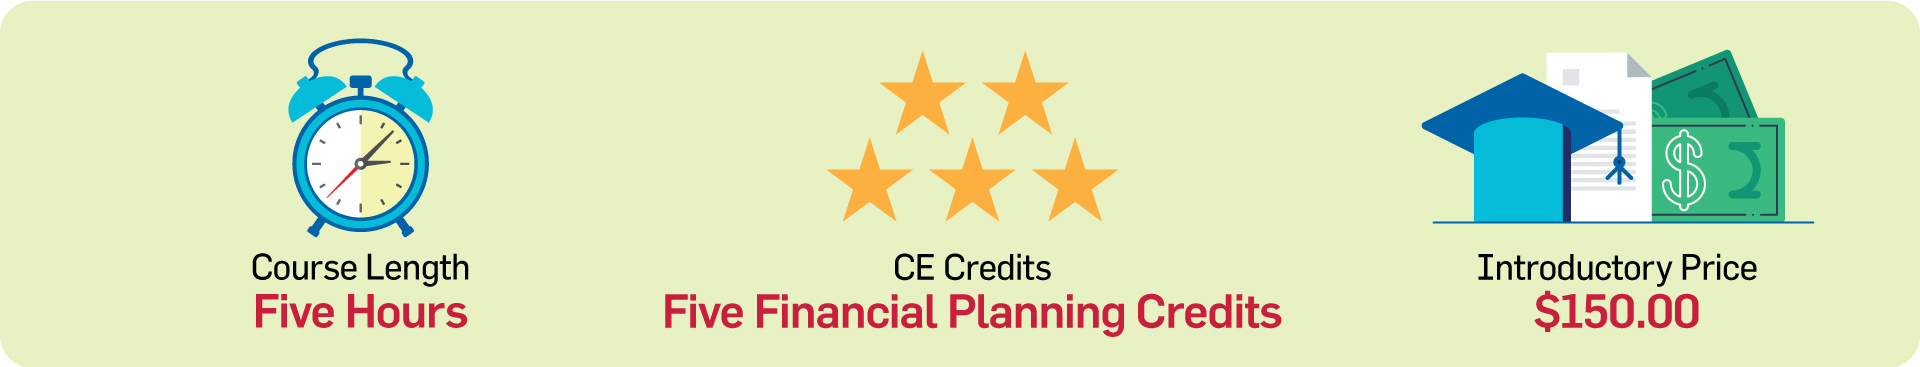 Course length: 5 hours, Five Financial CE Credits, Introductory price $150. Illustration